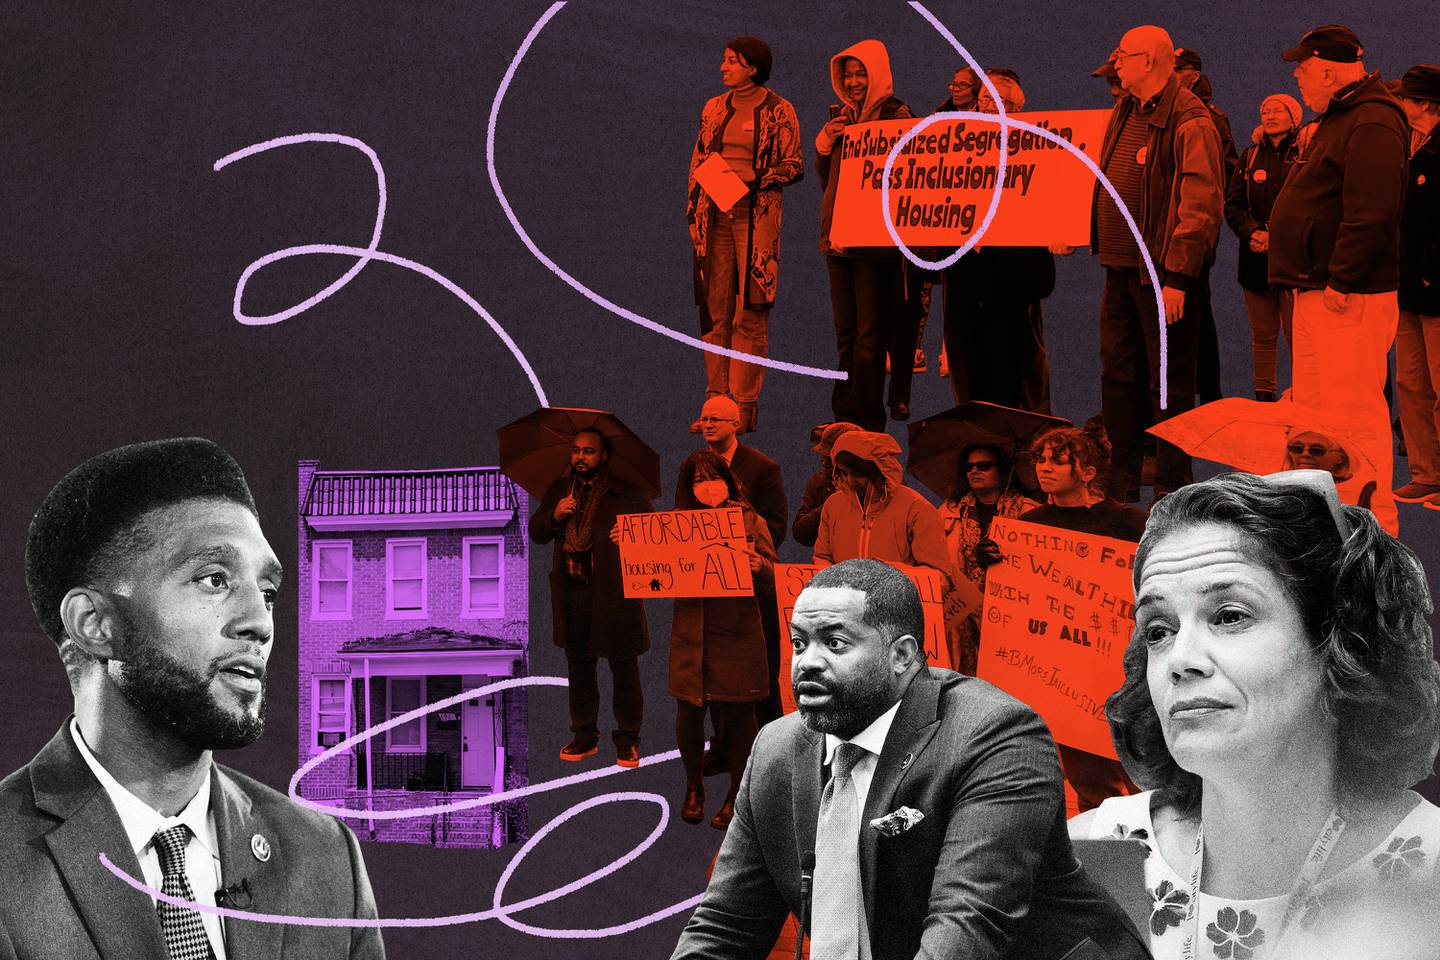 Photo illustration shows Mayor Brandon Scott on left side of image, facing two groups of activists demonstrating, Council President Nick Mosby and Councilwoman Odette Ramos on right side of image, facing him. In between Mayor Scott and the others is one Baltimore row house in purple.